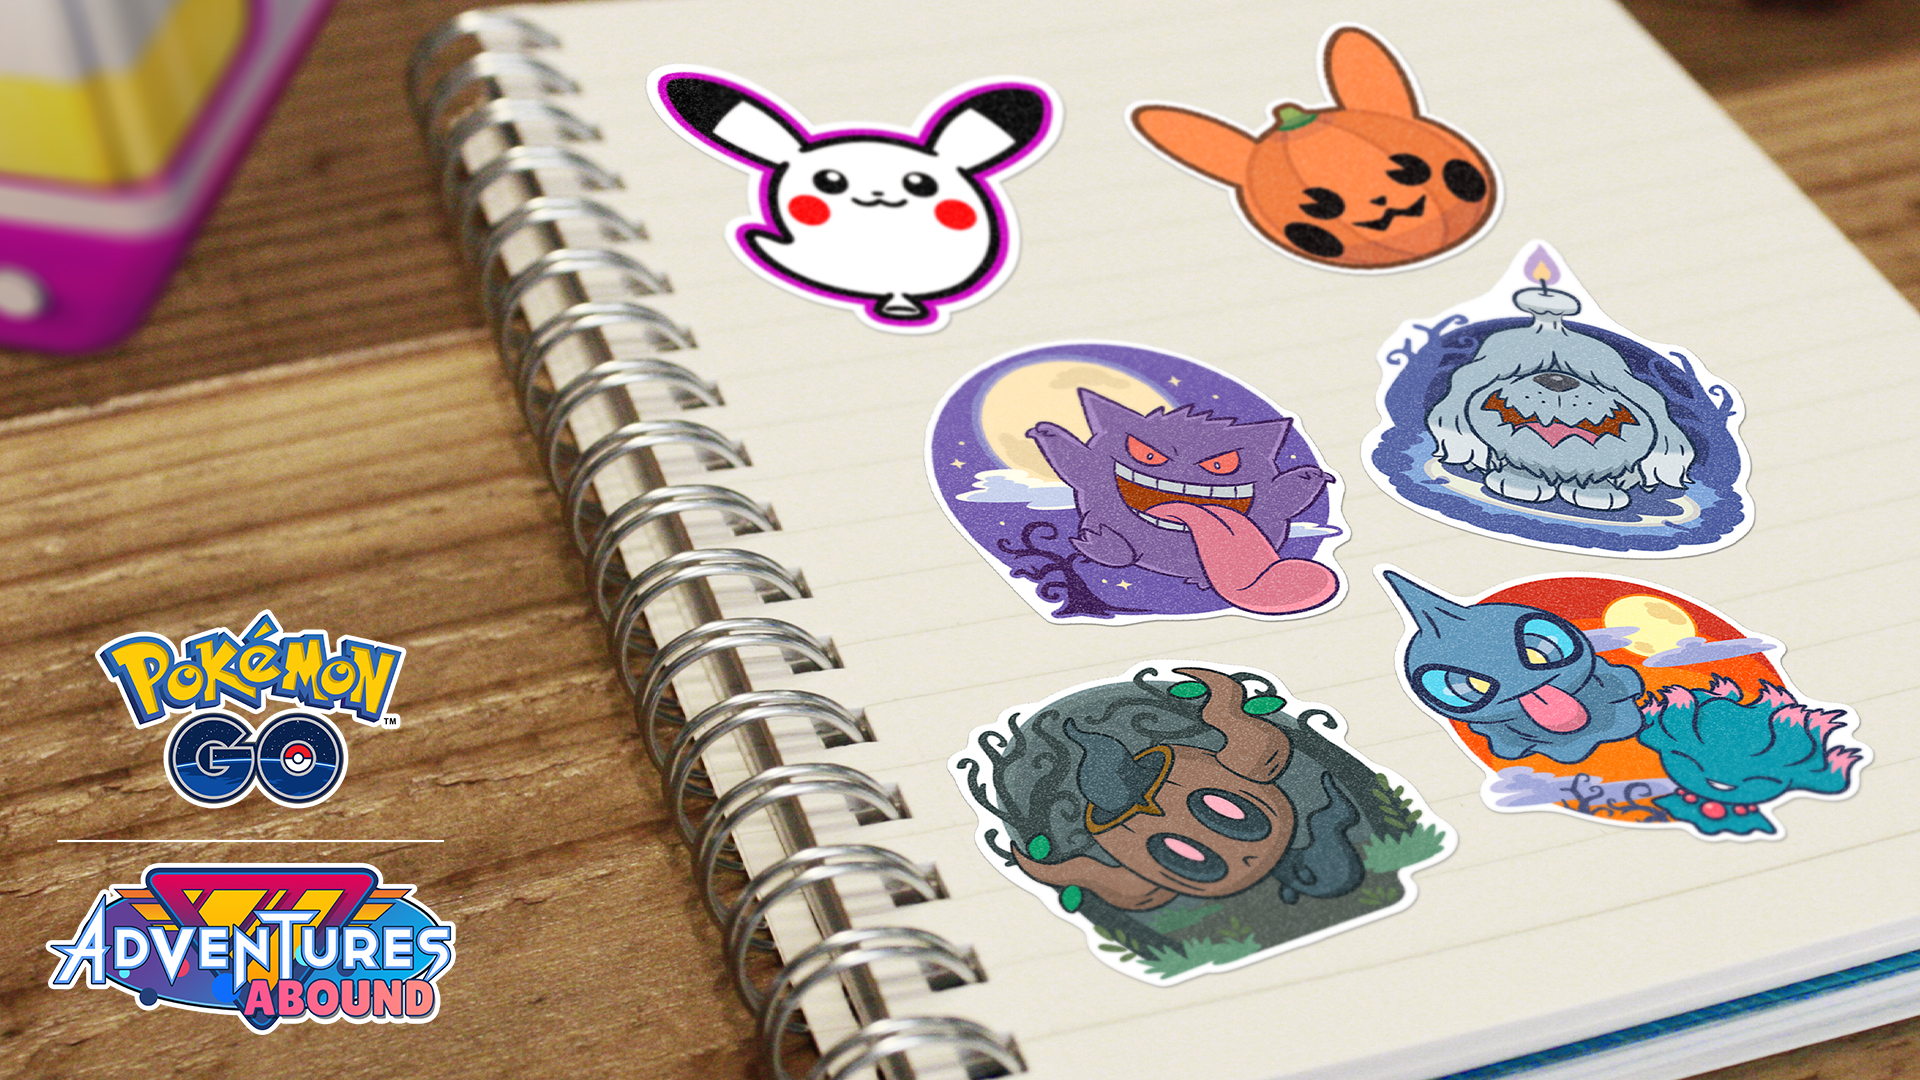 Event-themed stickers of Ghost Pokémon